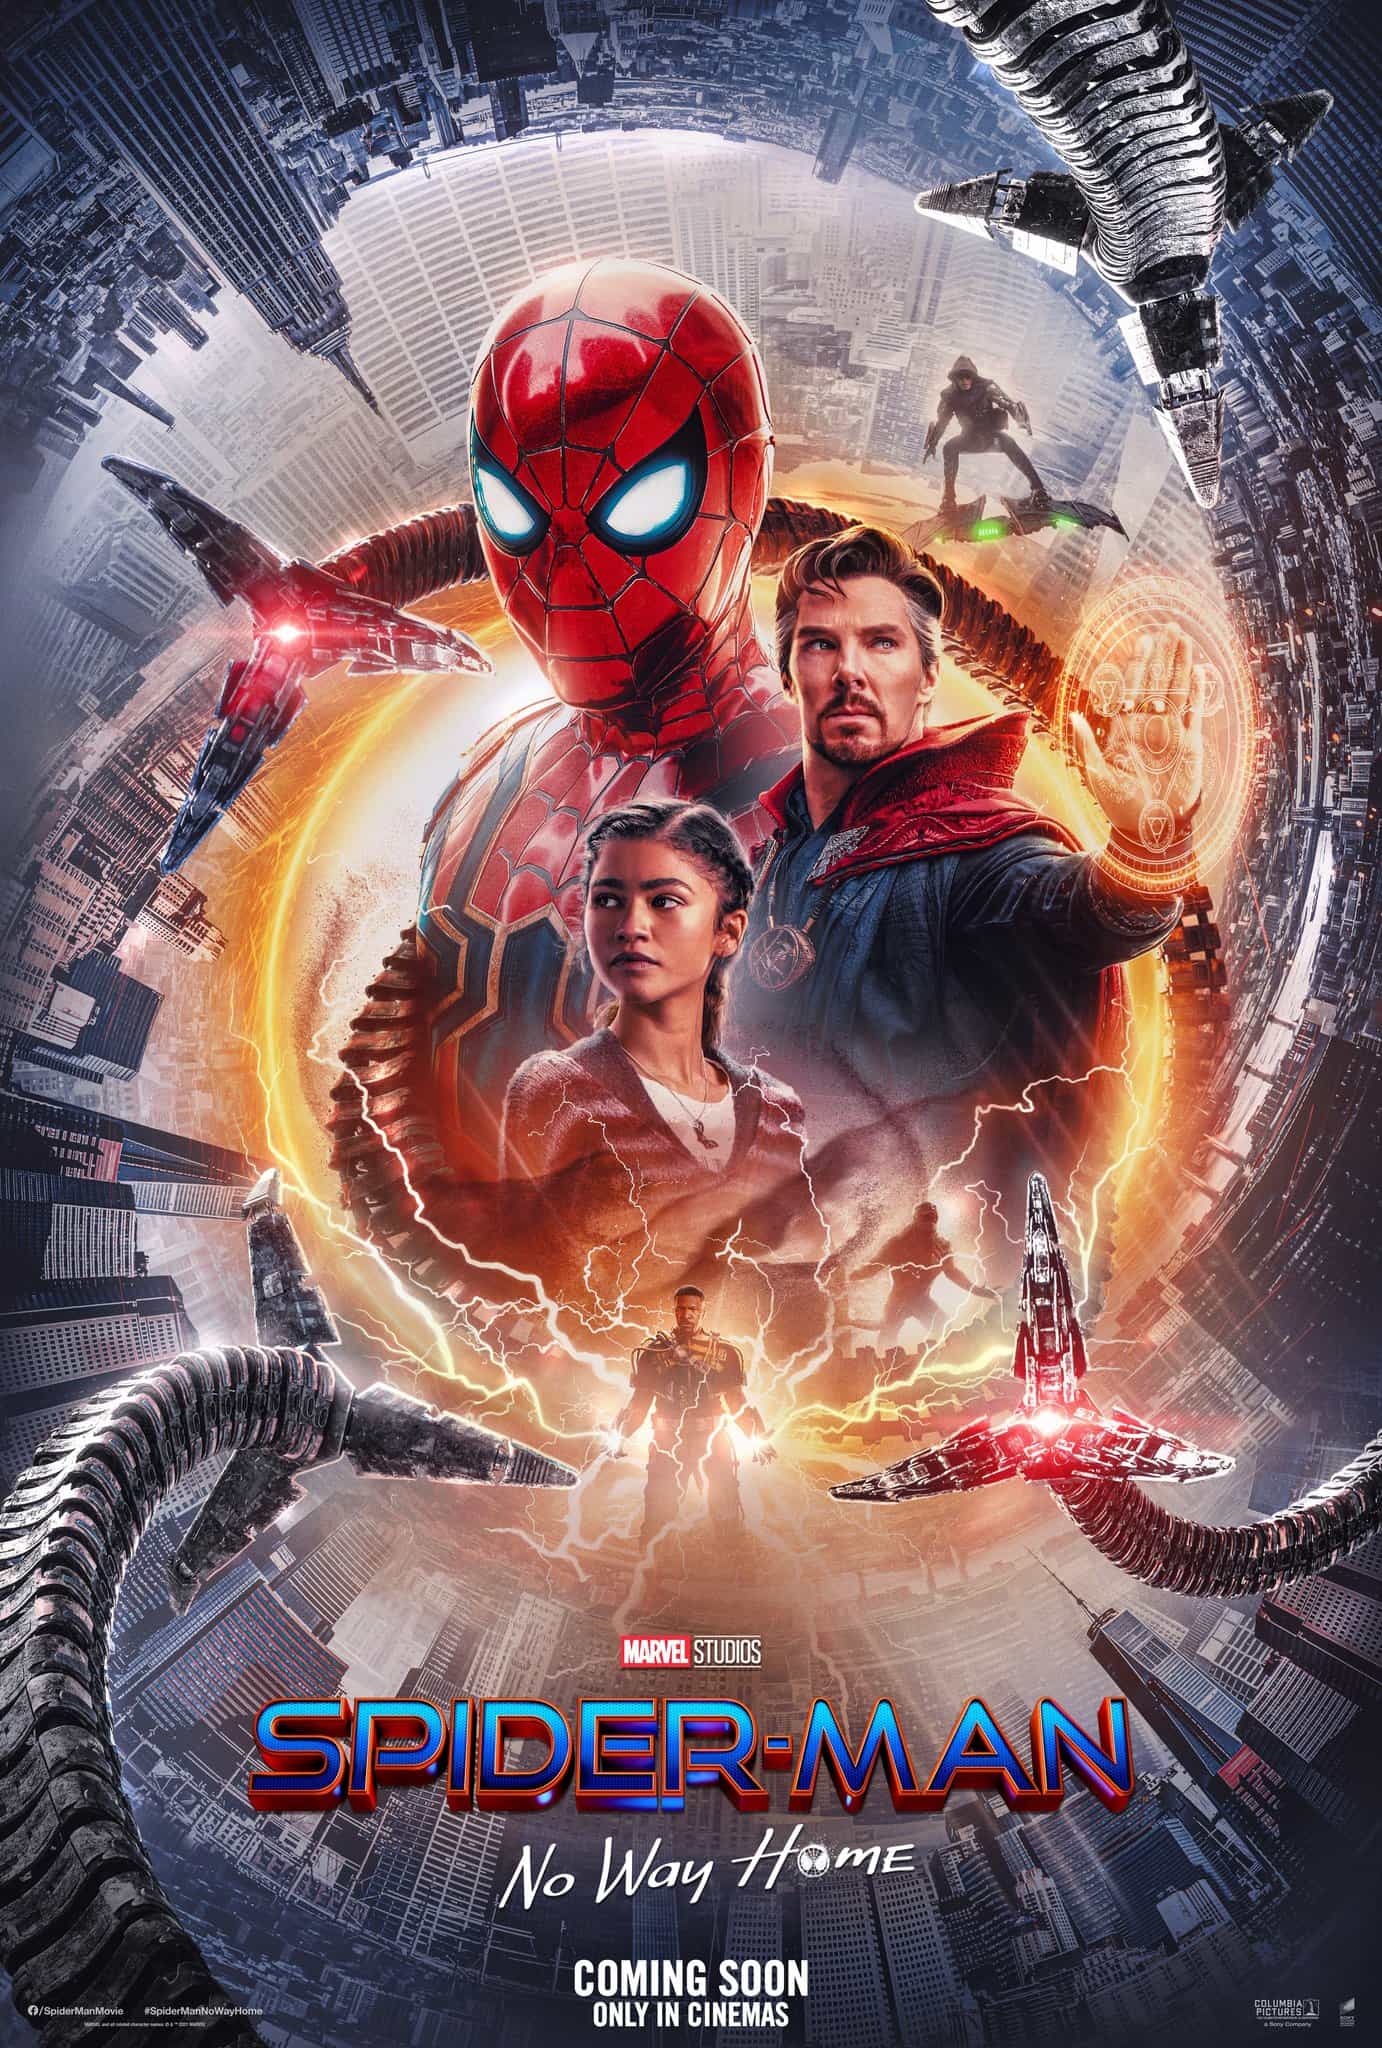 US Box Office Weekend Report 21st - 23rd January 2022: Spider-Man goes back to the top of the US box office as its total gross goes over $700 Million